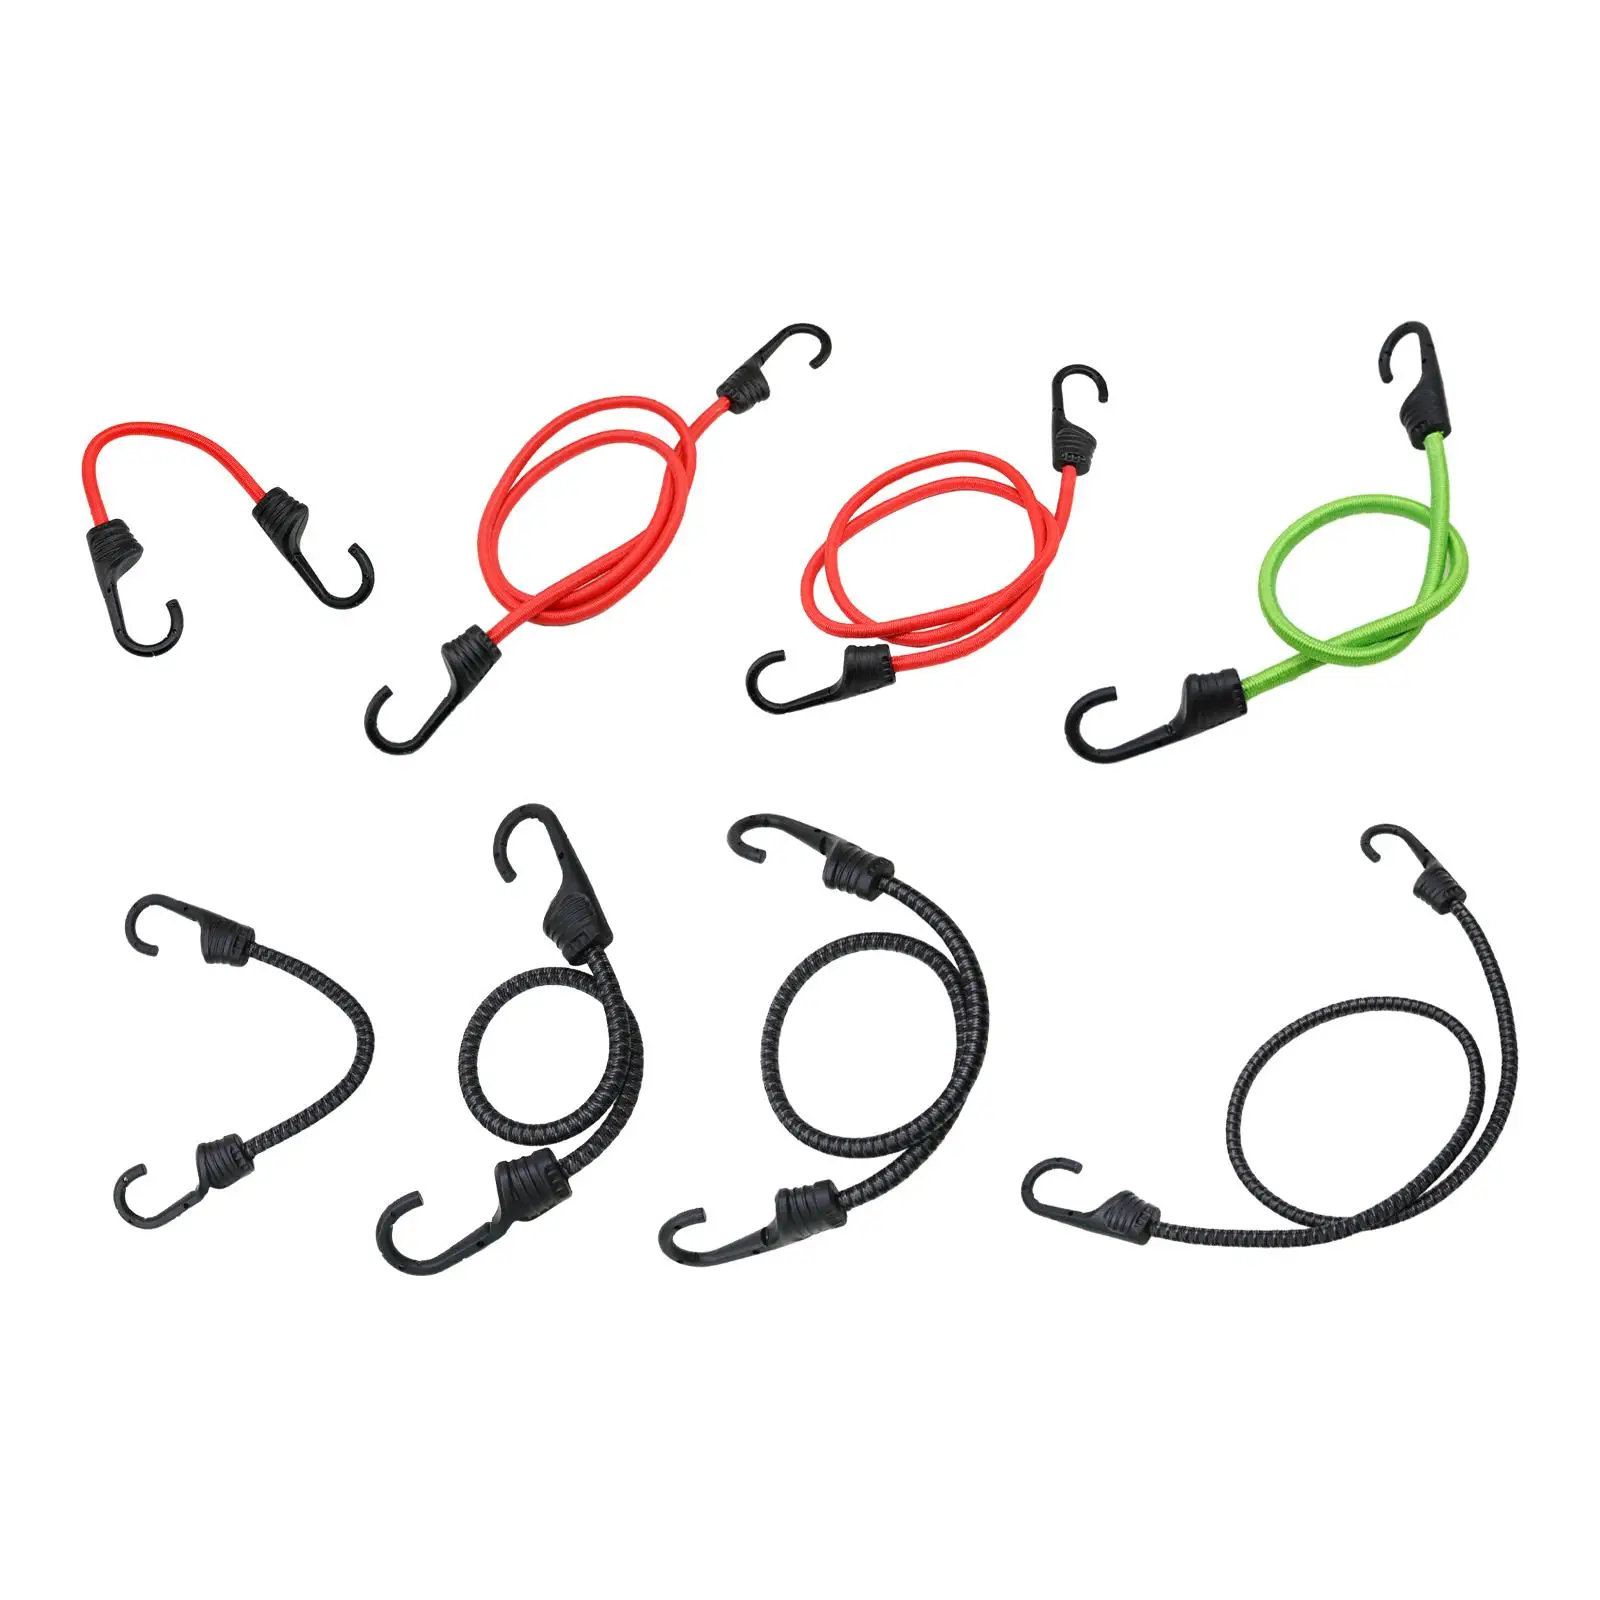 Bicycle Bungee Cord Elastic Strap Bicycle Luggage Carrier Bike Accessories